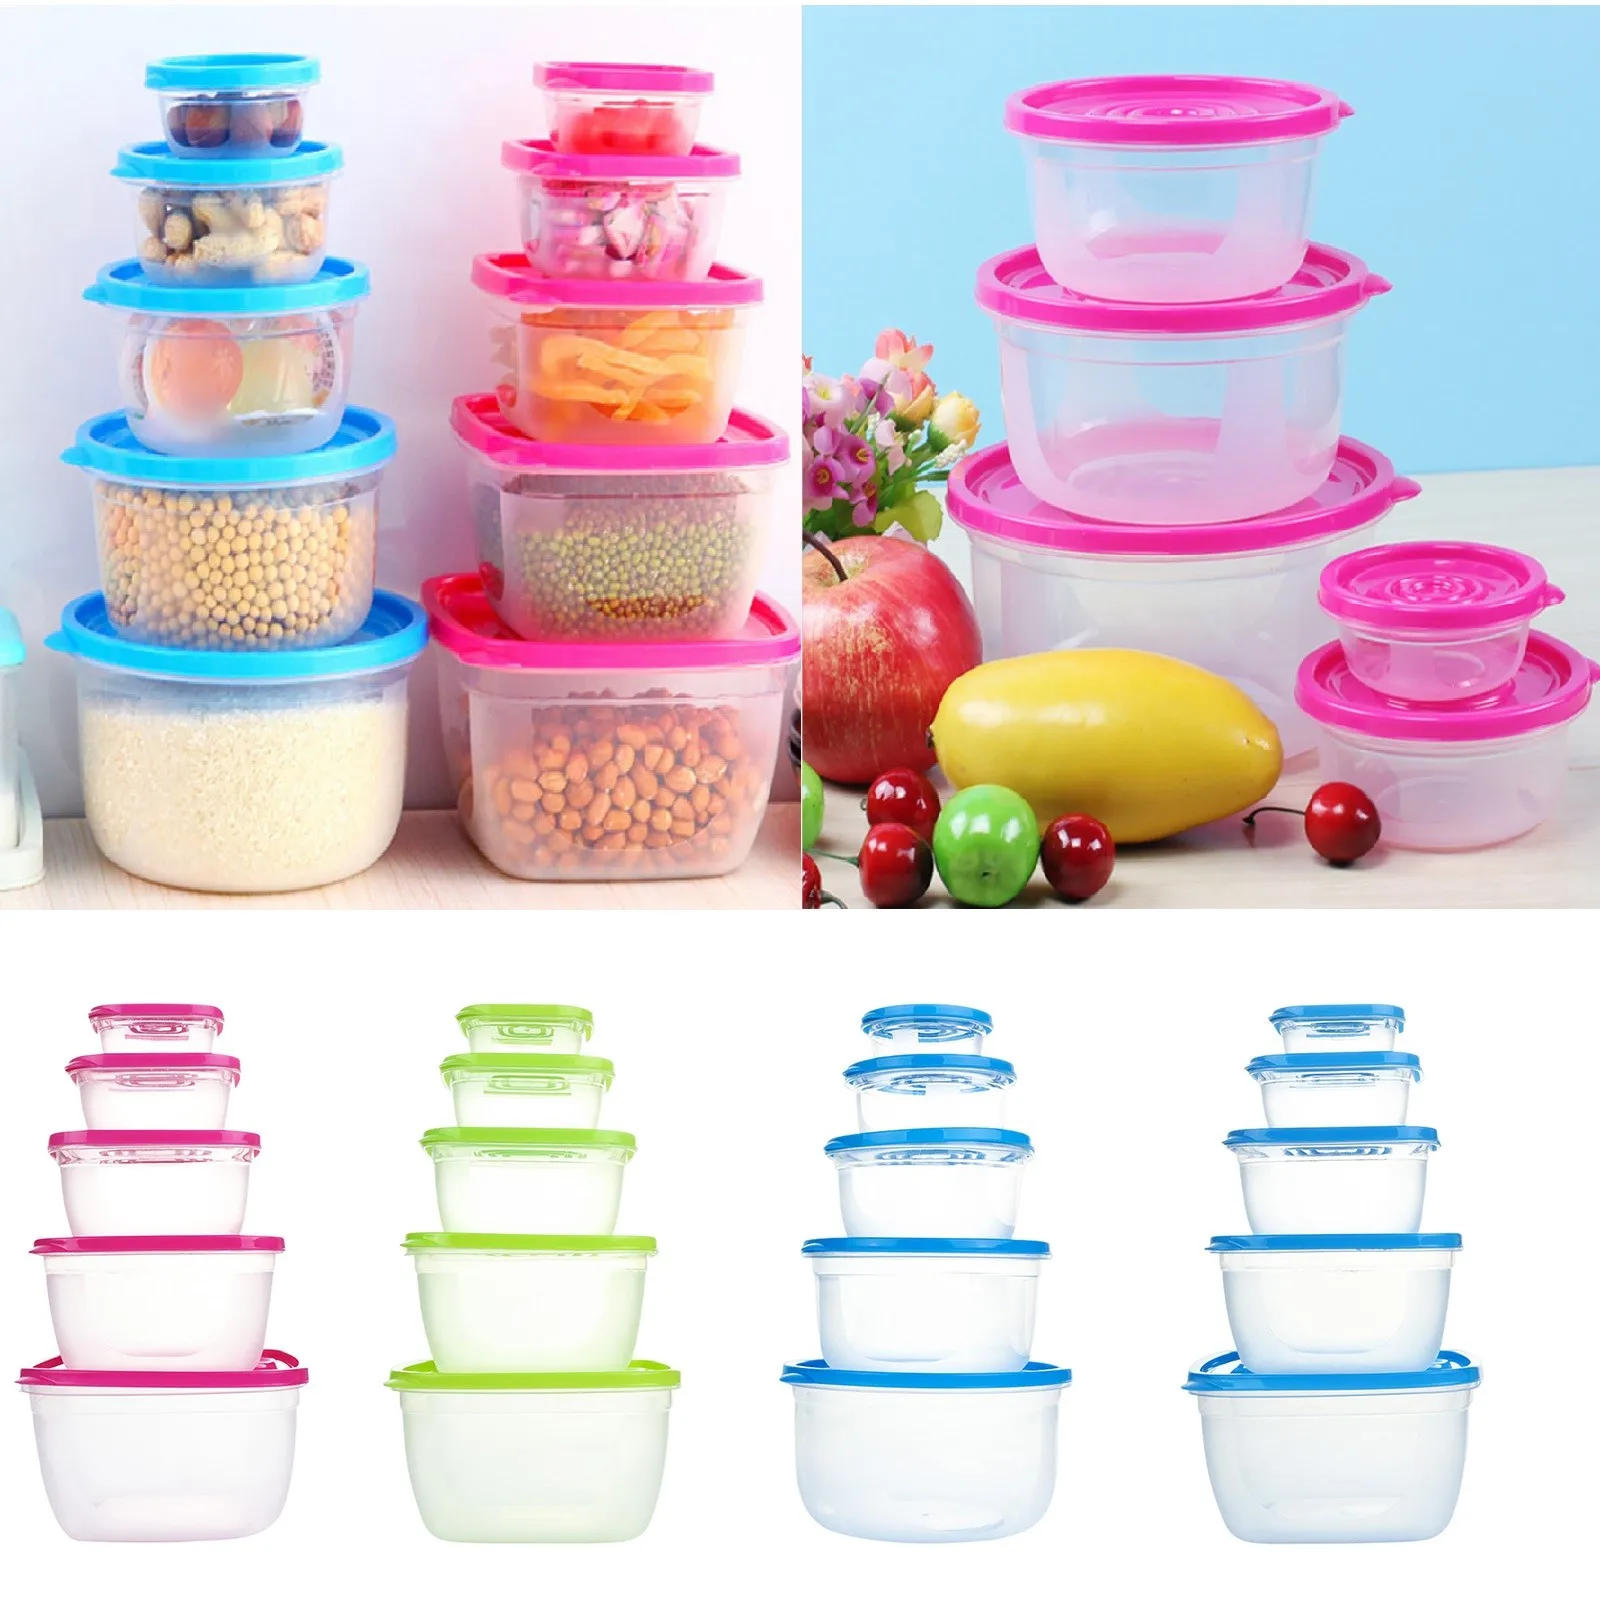 https://ae01.alicdn.com/kf/S9dec782dcb744c9792f64dc341de302dc/Microwave-Food-Storage-Container-Set-Plastic-Bowls-With-Lid-Ideal-For-Students-And-Lunch-Boxes-Round.jpg